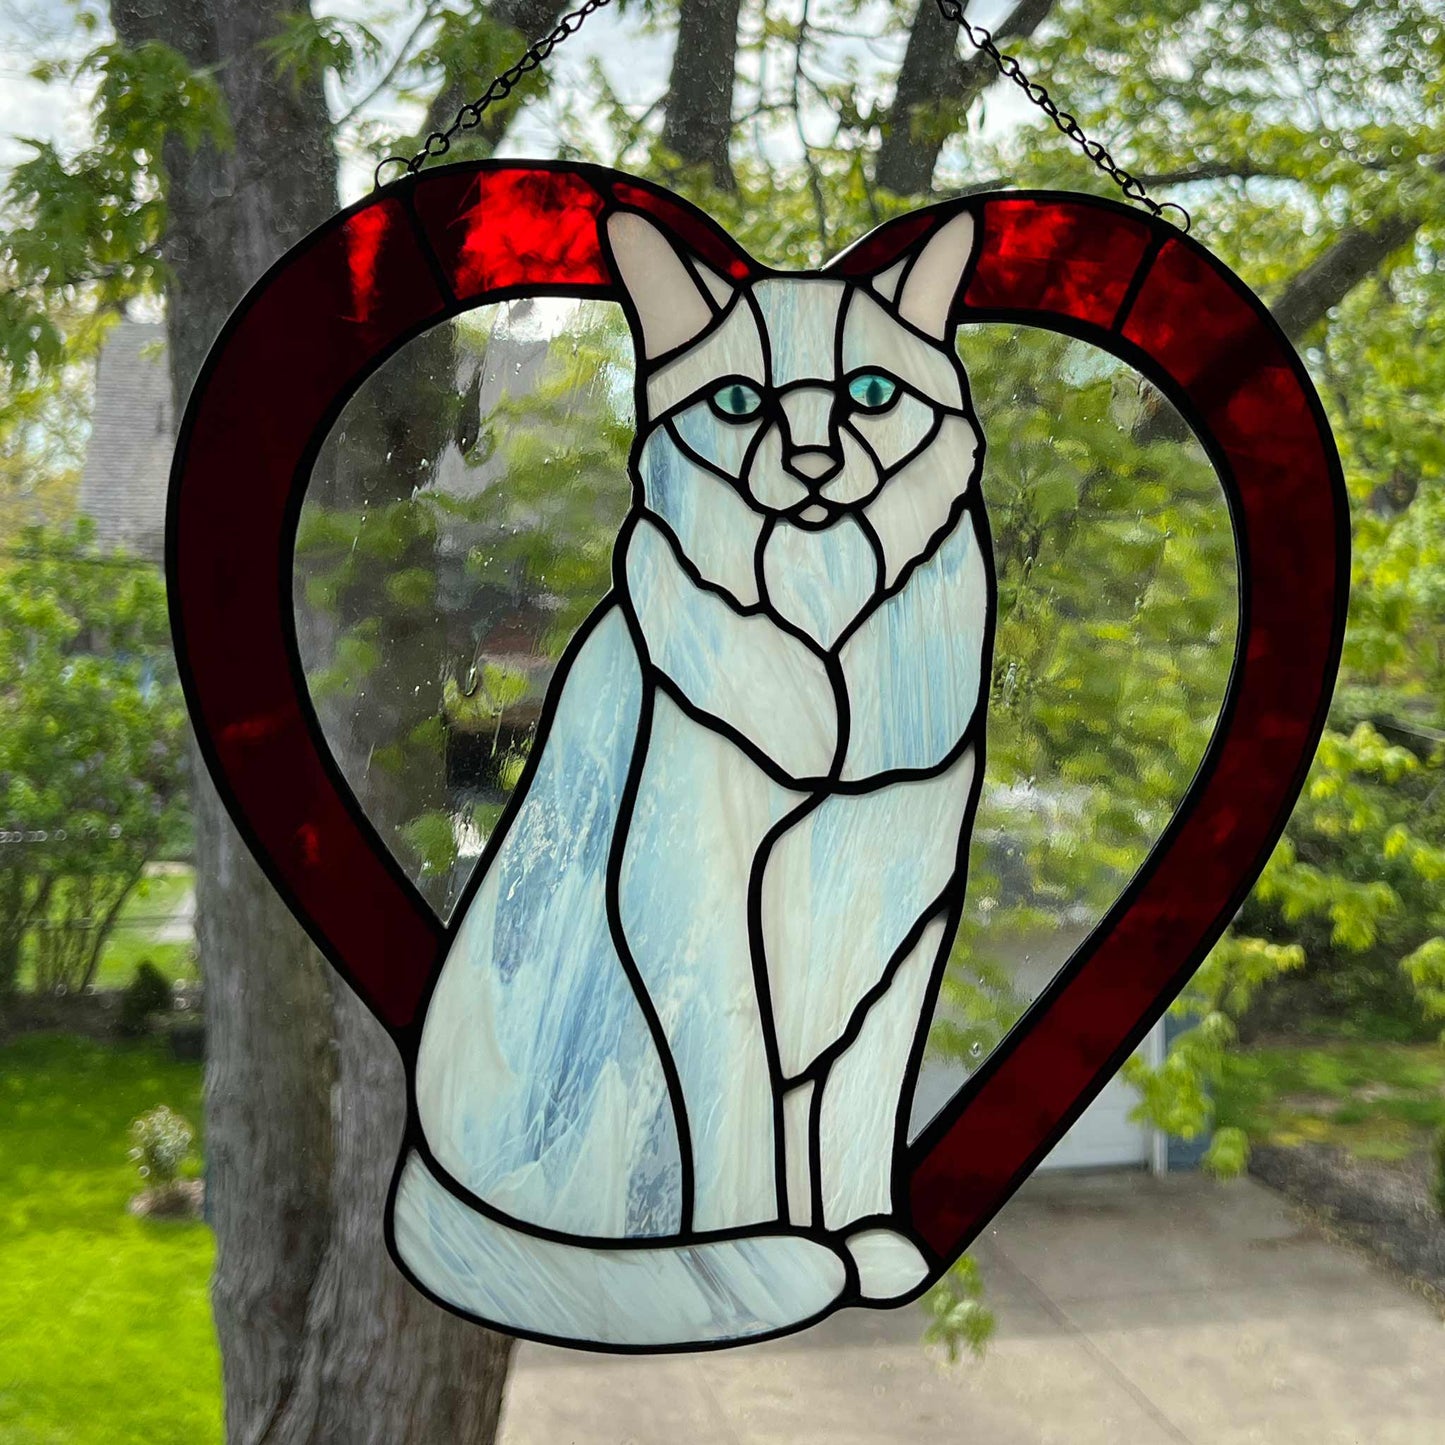 An all white stained glass sitting cat surrounded by a red heart. The glass used for the white fur is textured to resemble real fur and the eyes are an iridescent blue.  Light pink is used for the inner ear and the nose. A clear rainy glass is used between the cat and the heart for stability. This picture shows the back side of the cat.